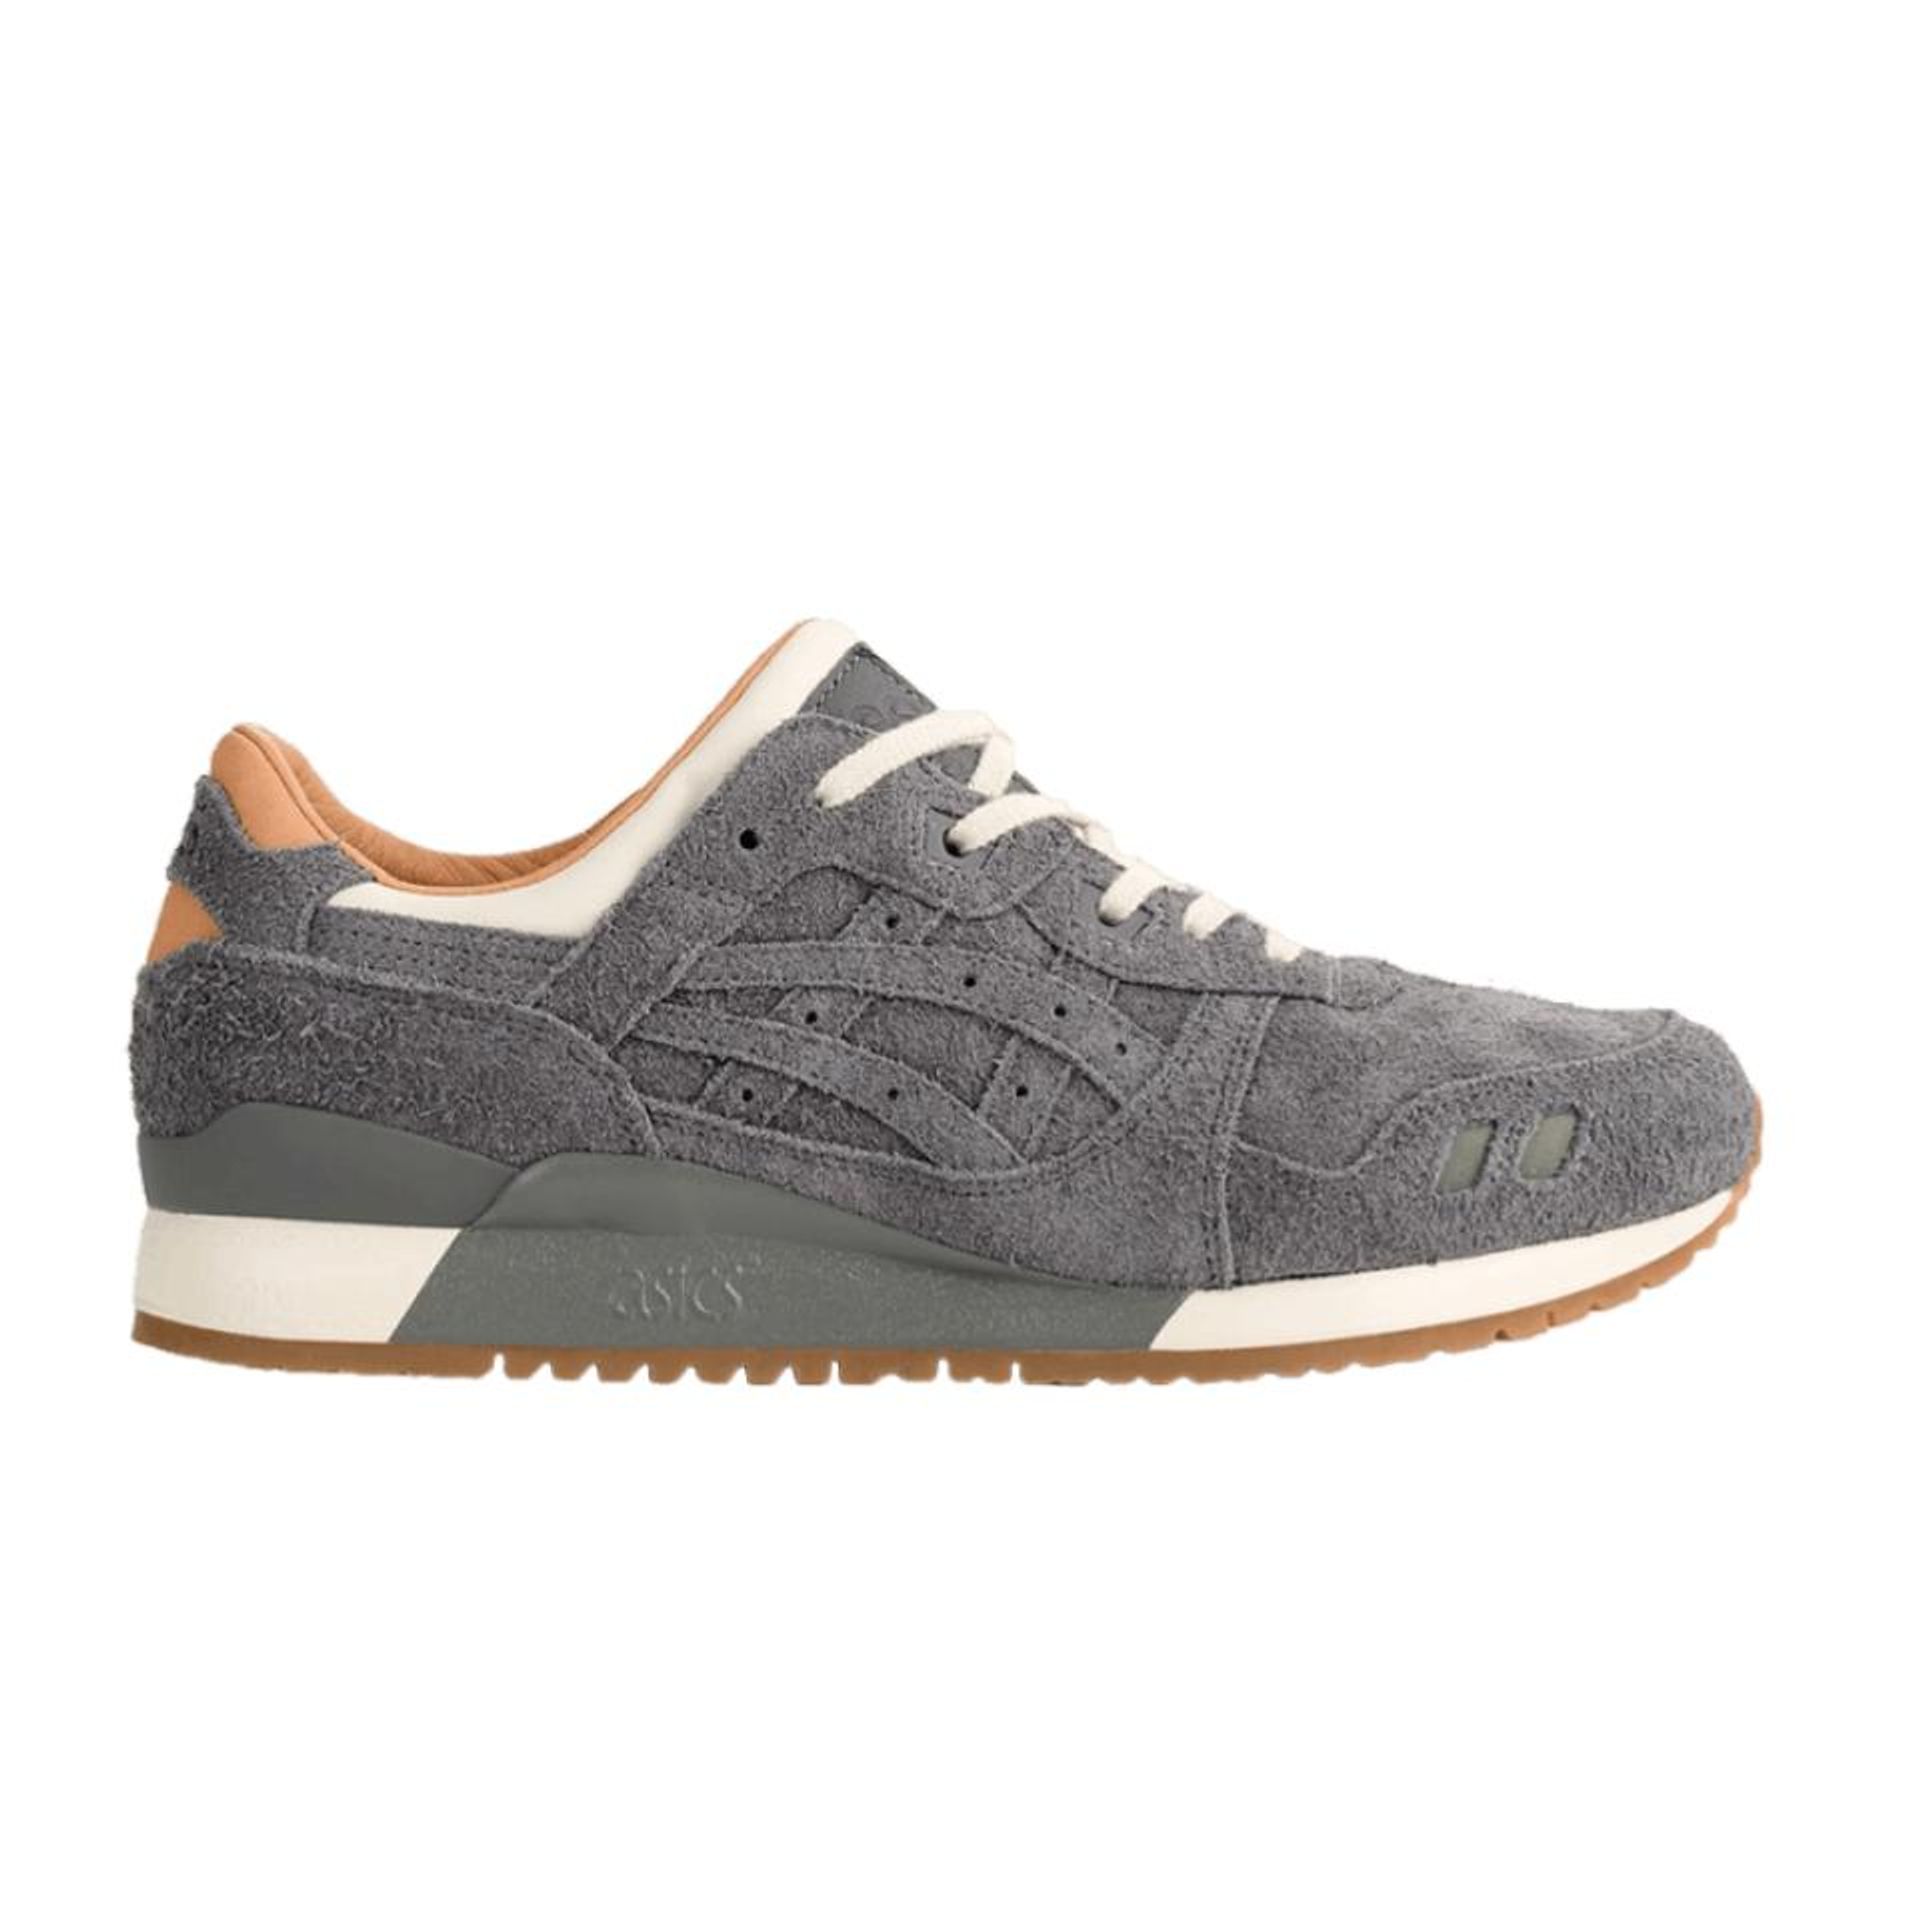 ASICS Packer Shoes x J.Crew x Gel Lyte 3 '1907 Collection Charcoal'